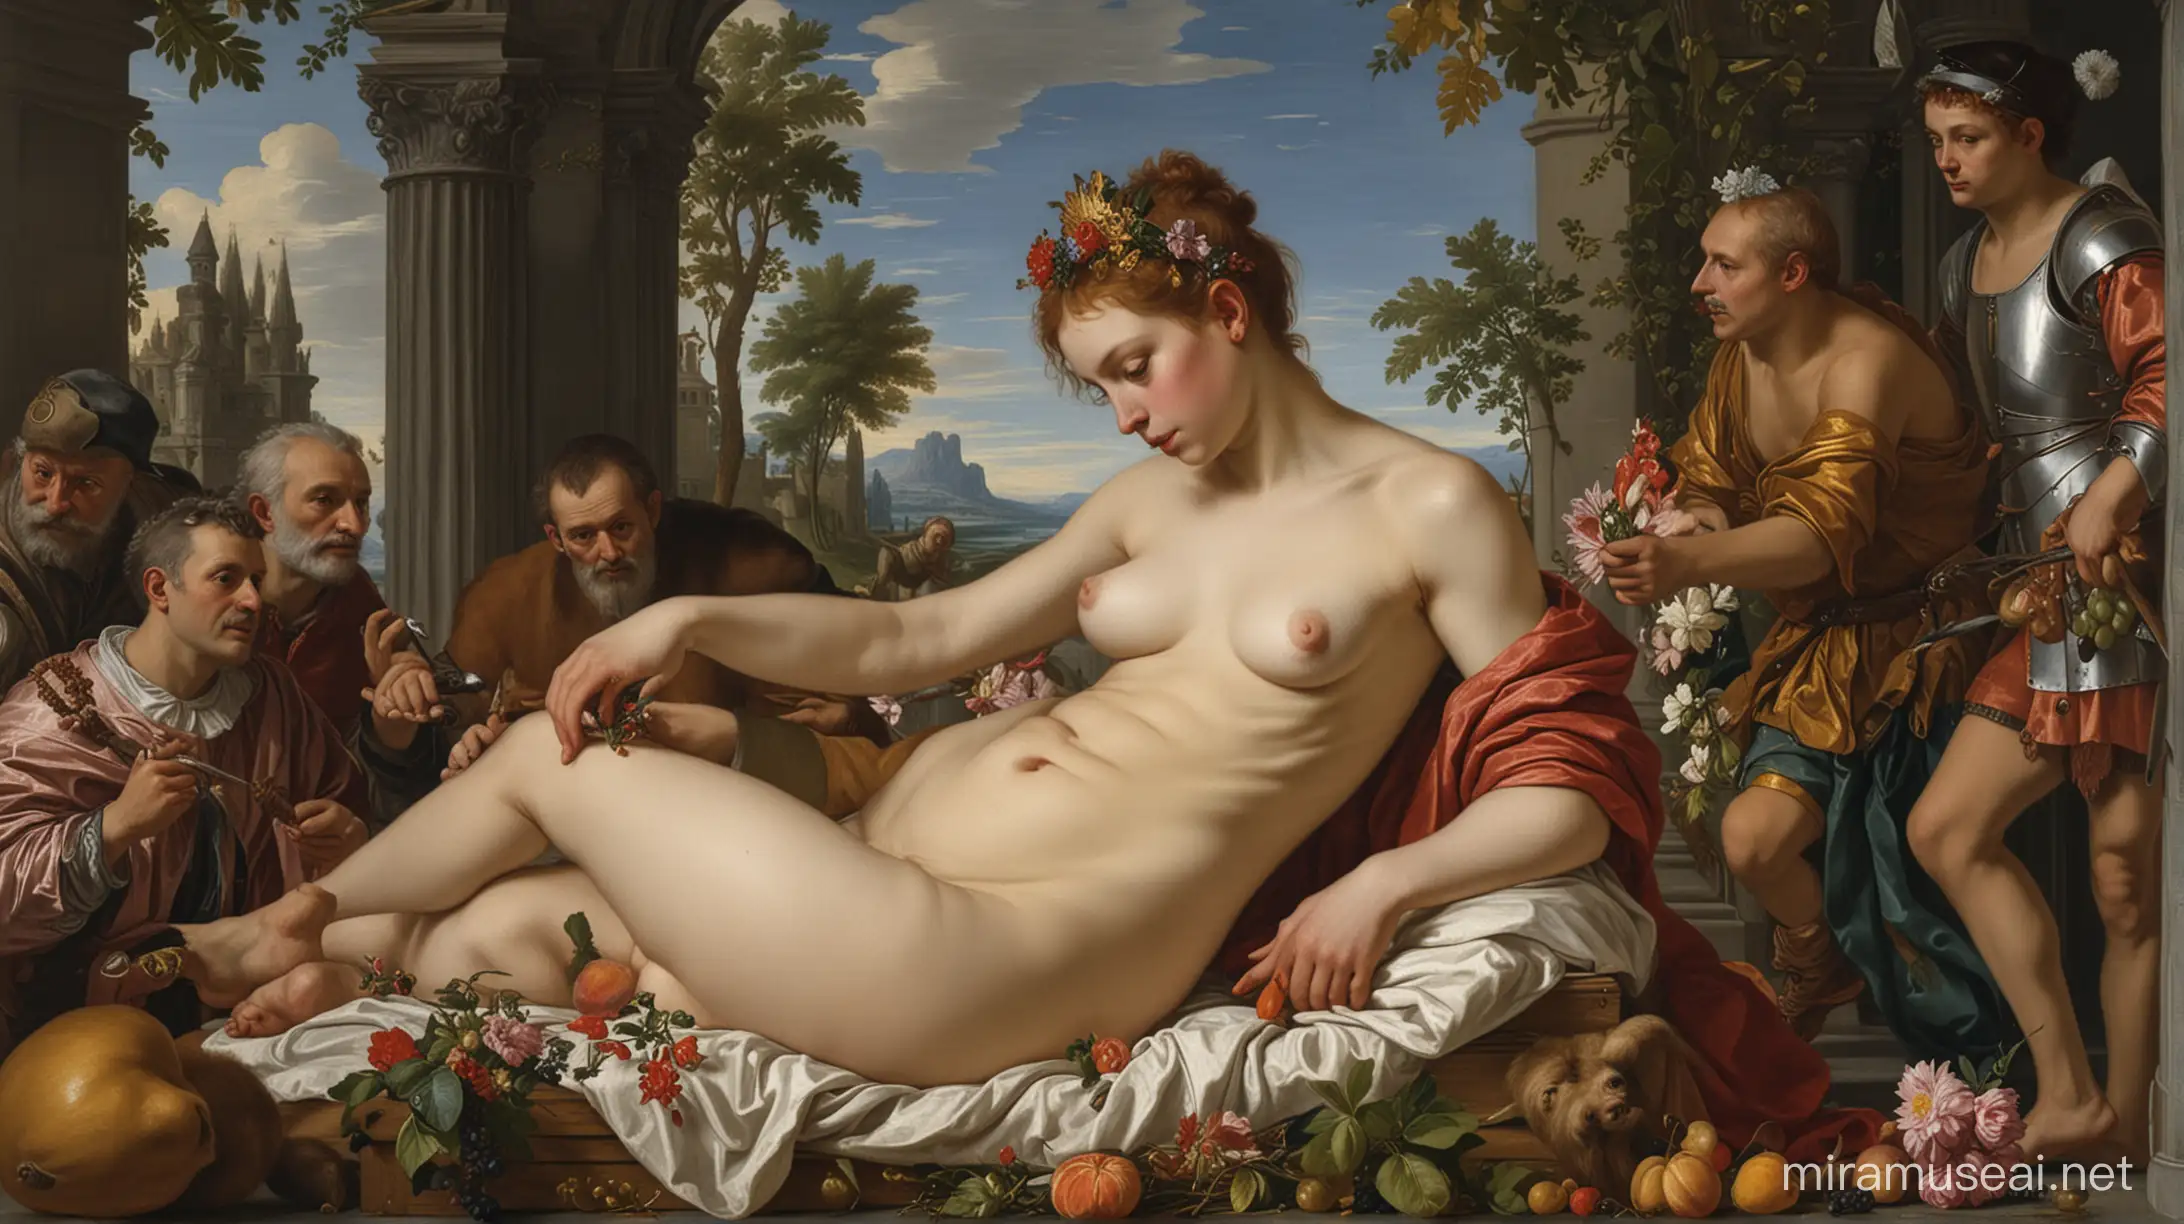 Old Masters Painting Geopolitical Robot Birth with Figures and Symbolism